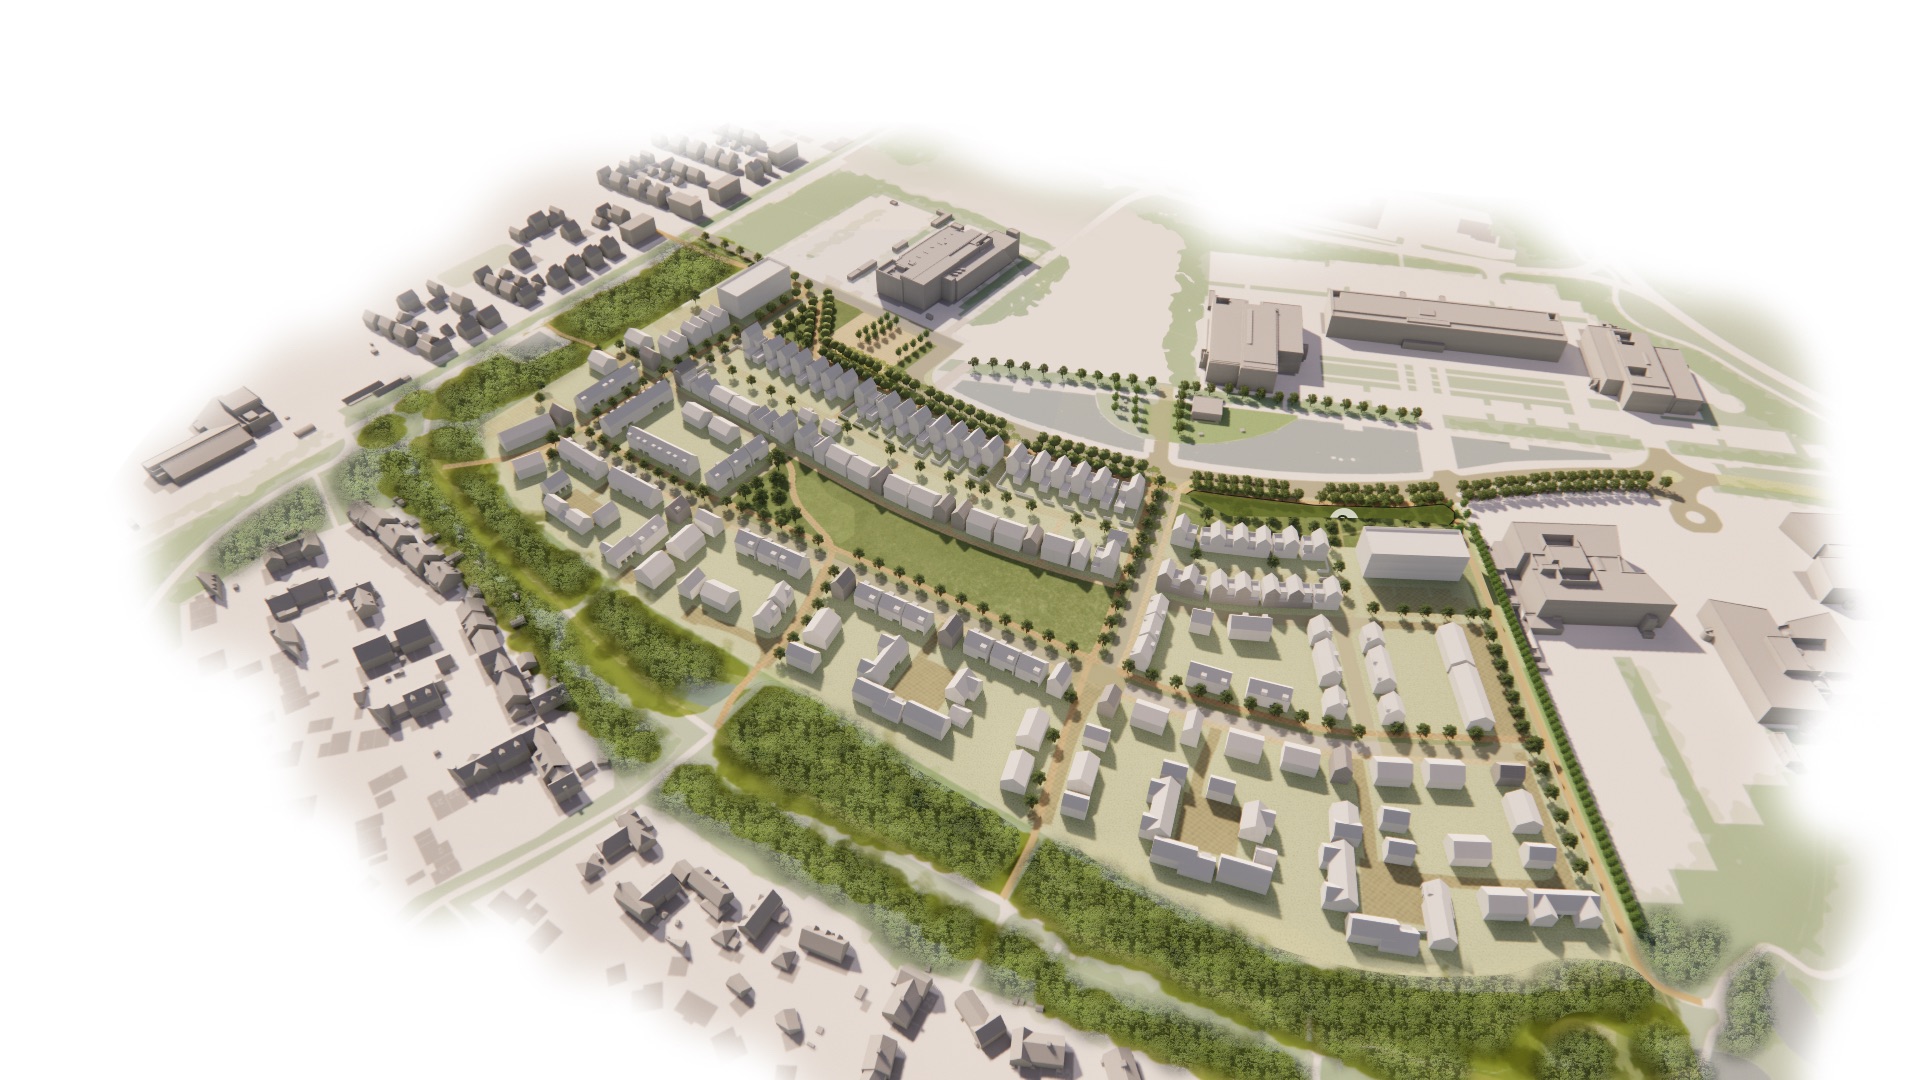 SCIP submits planning application for sustainable Cambourne development